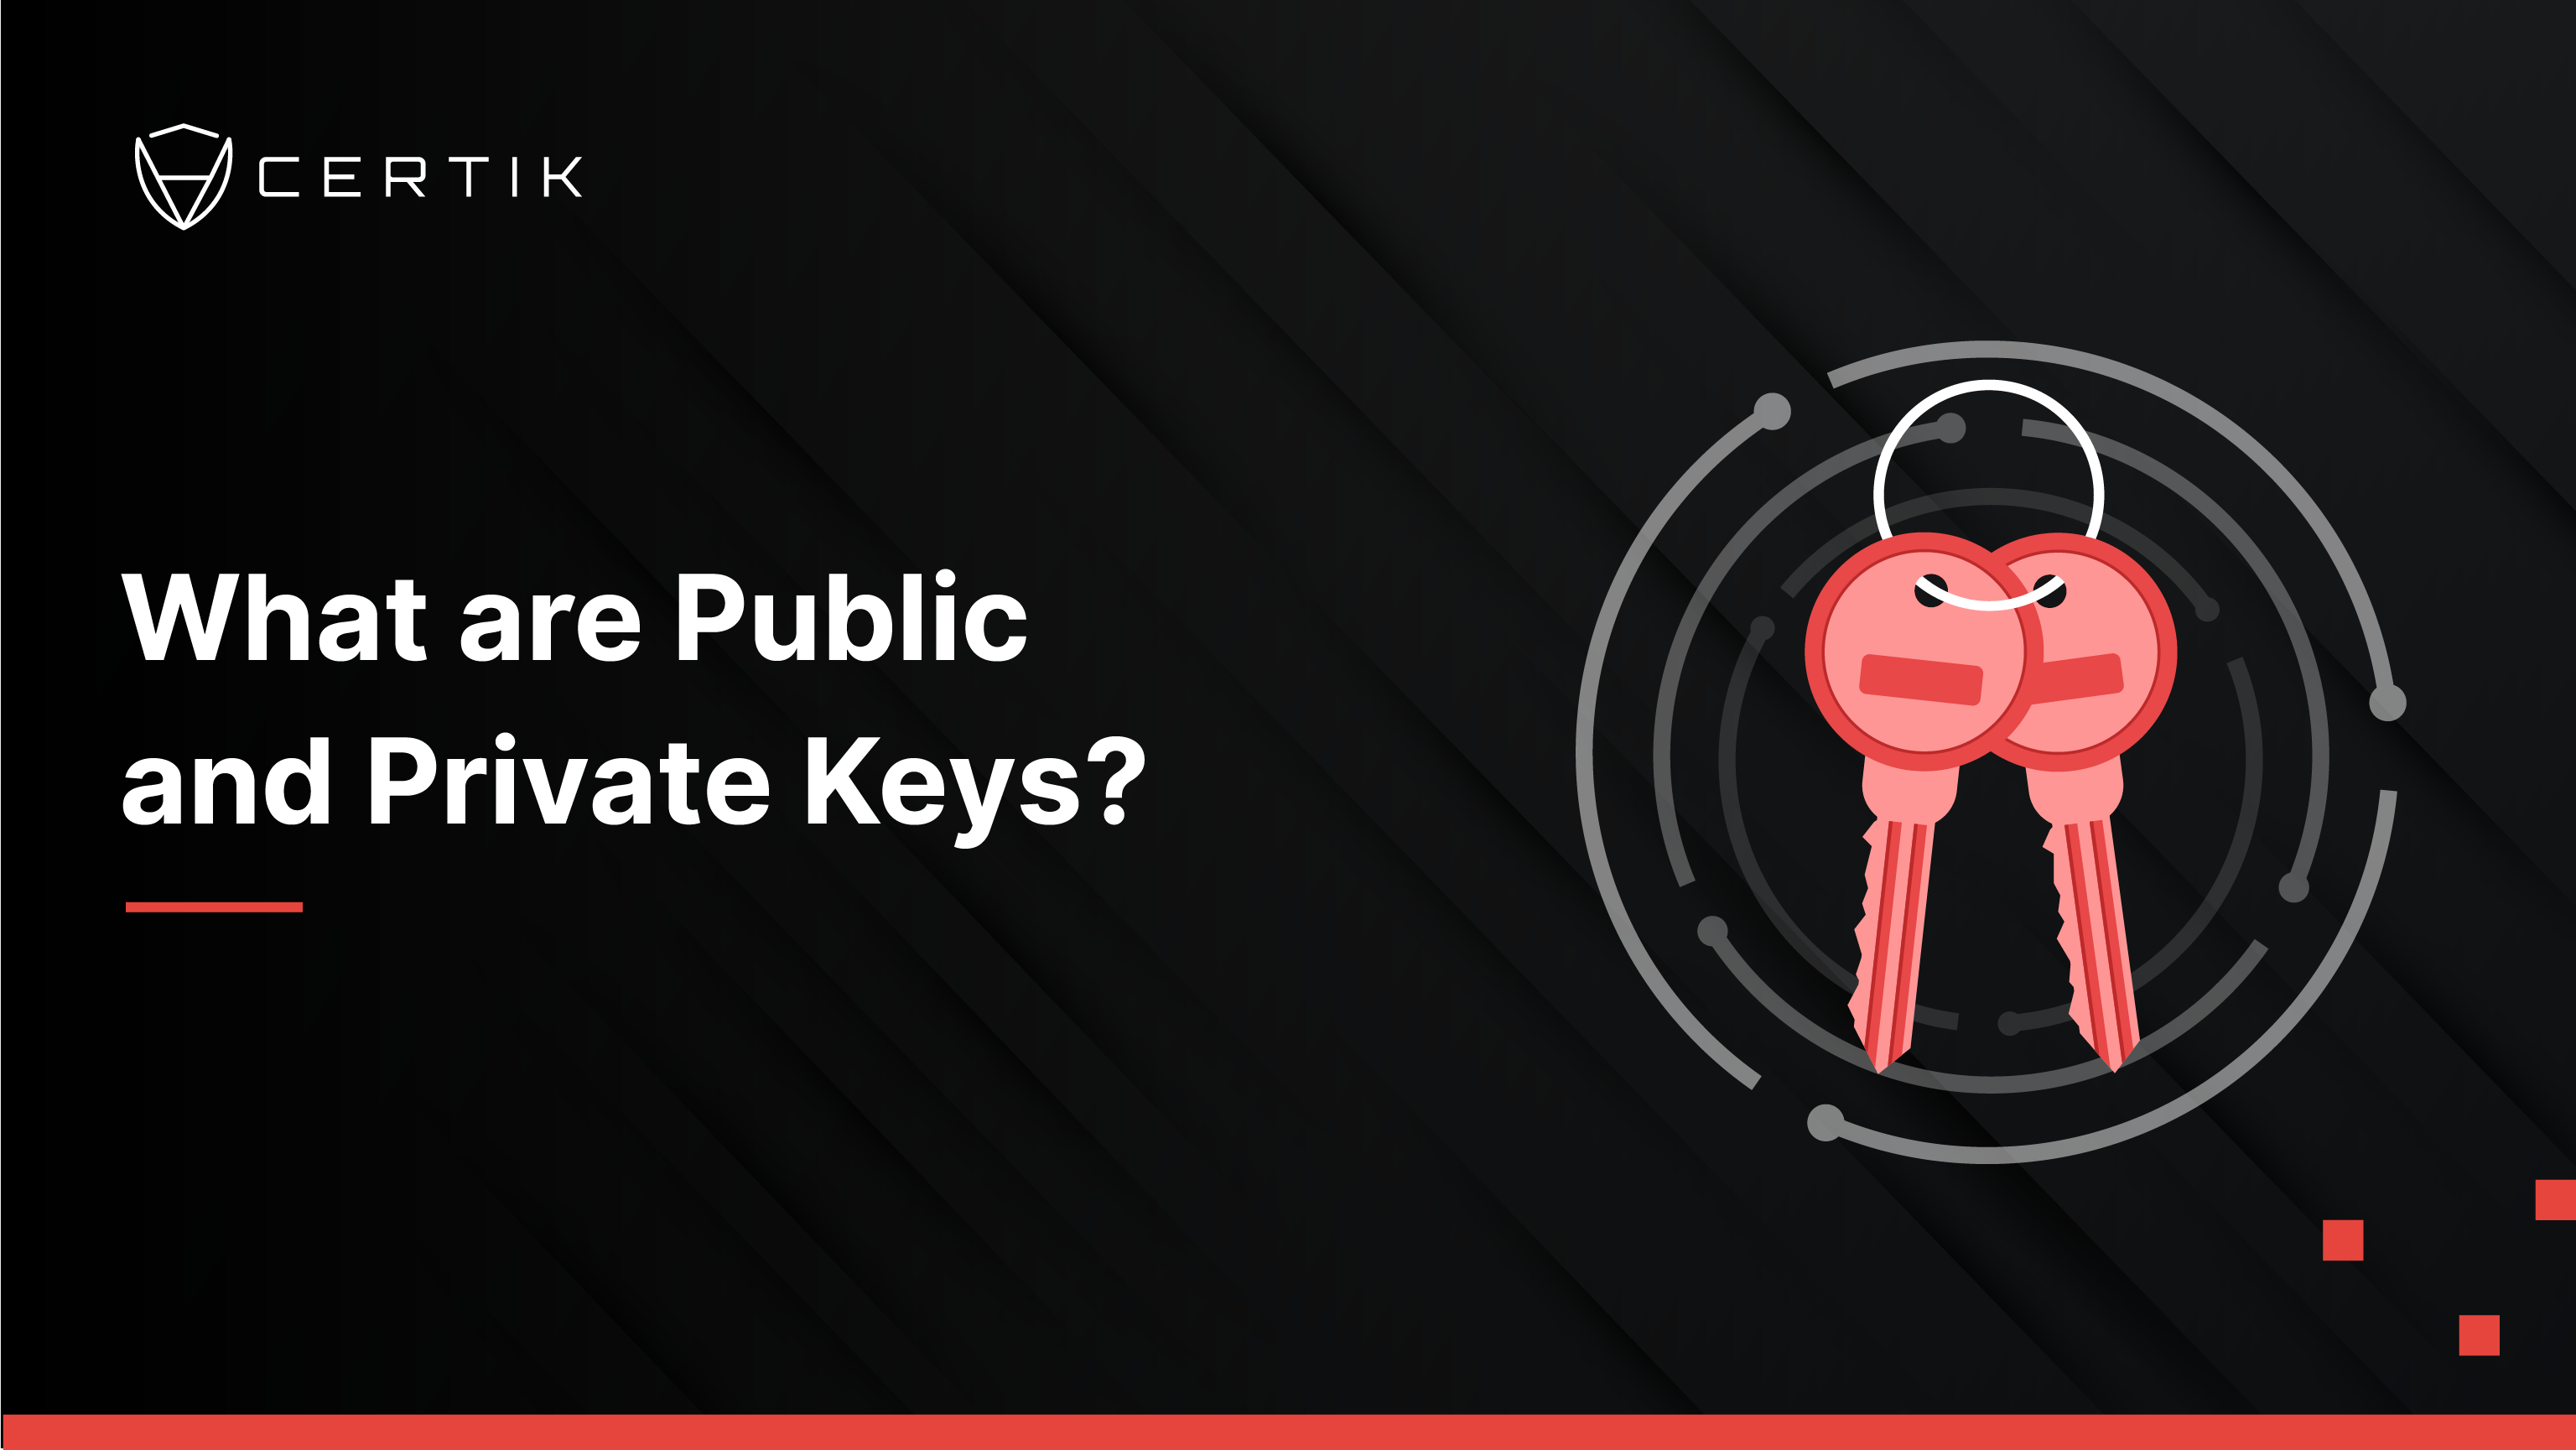 What are Public and Private Keys?